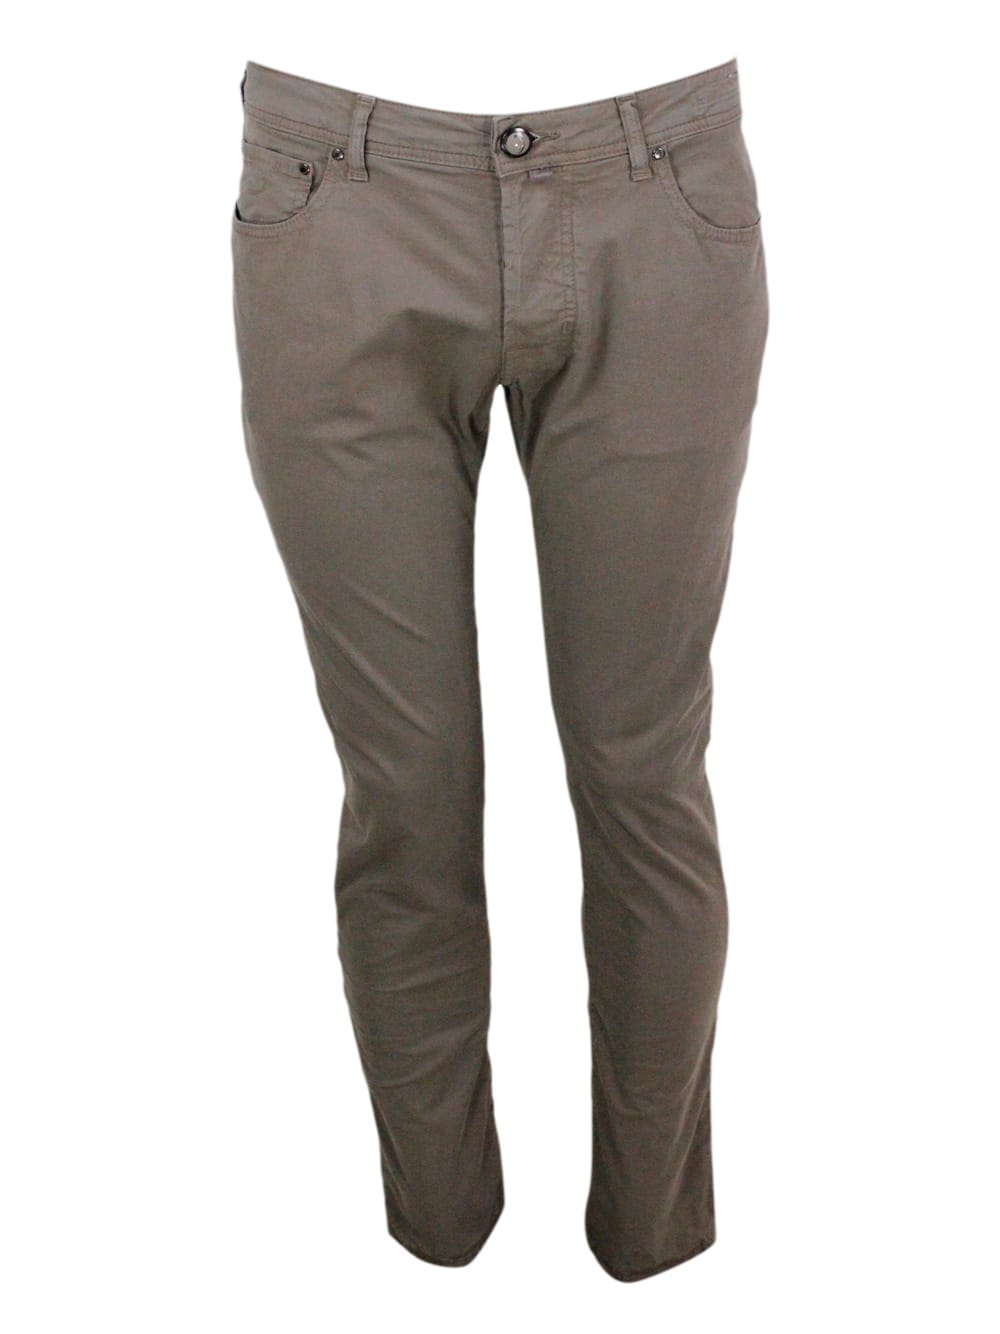 Jacob Cohen Bard J688 Luxury Edition Trousers In Soft Stretch Cotton With 5 Pockets With Closure Buttons And Lac In Taupe